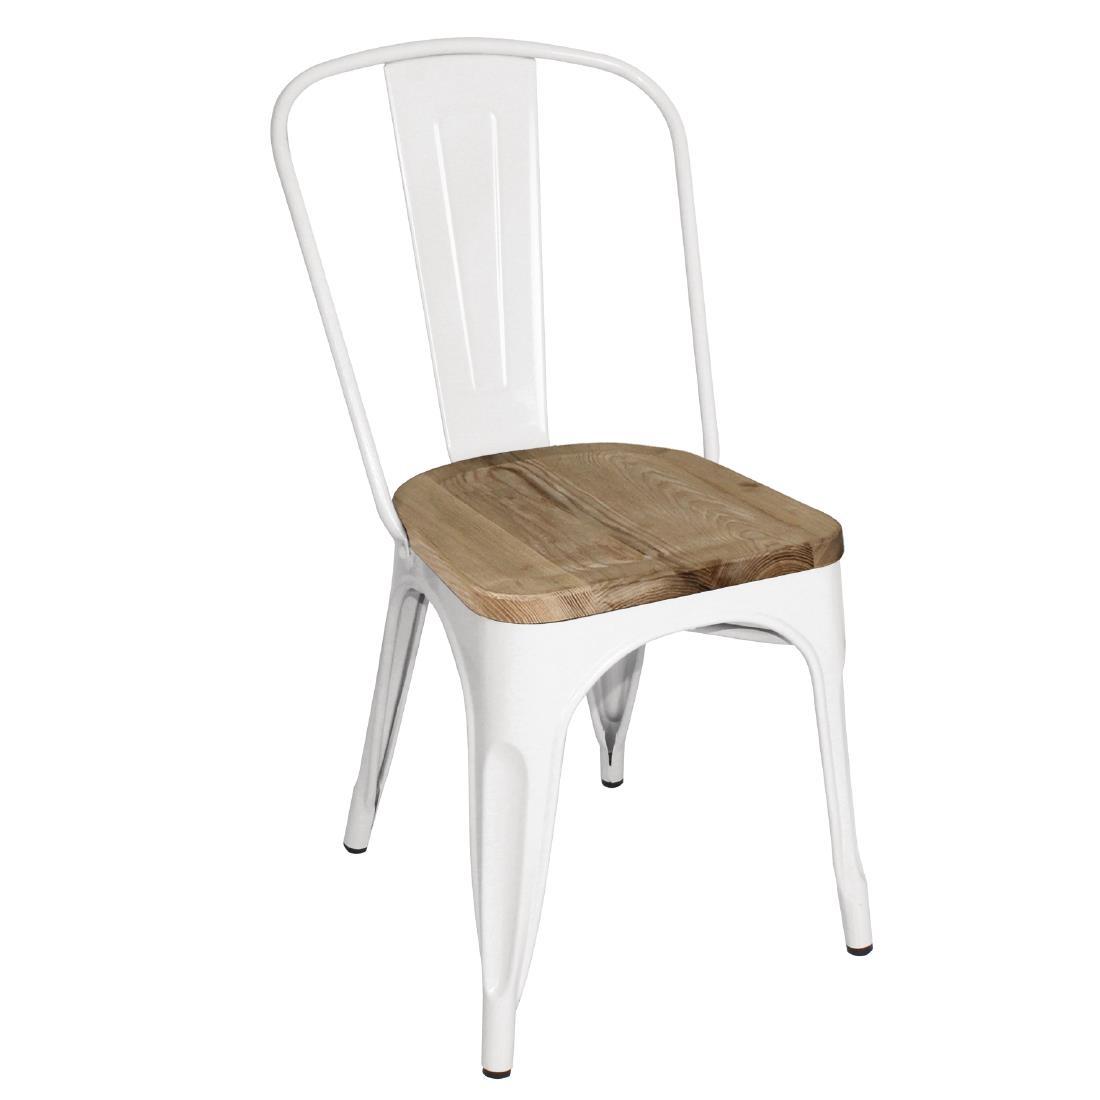 Bolero Bistro Side Chairs with Wooden Seat Pad White (Pack of 4) - GM644  - 1